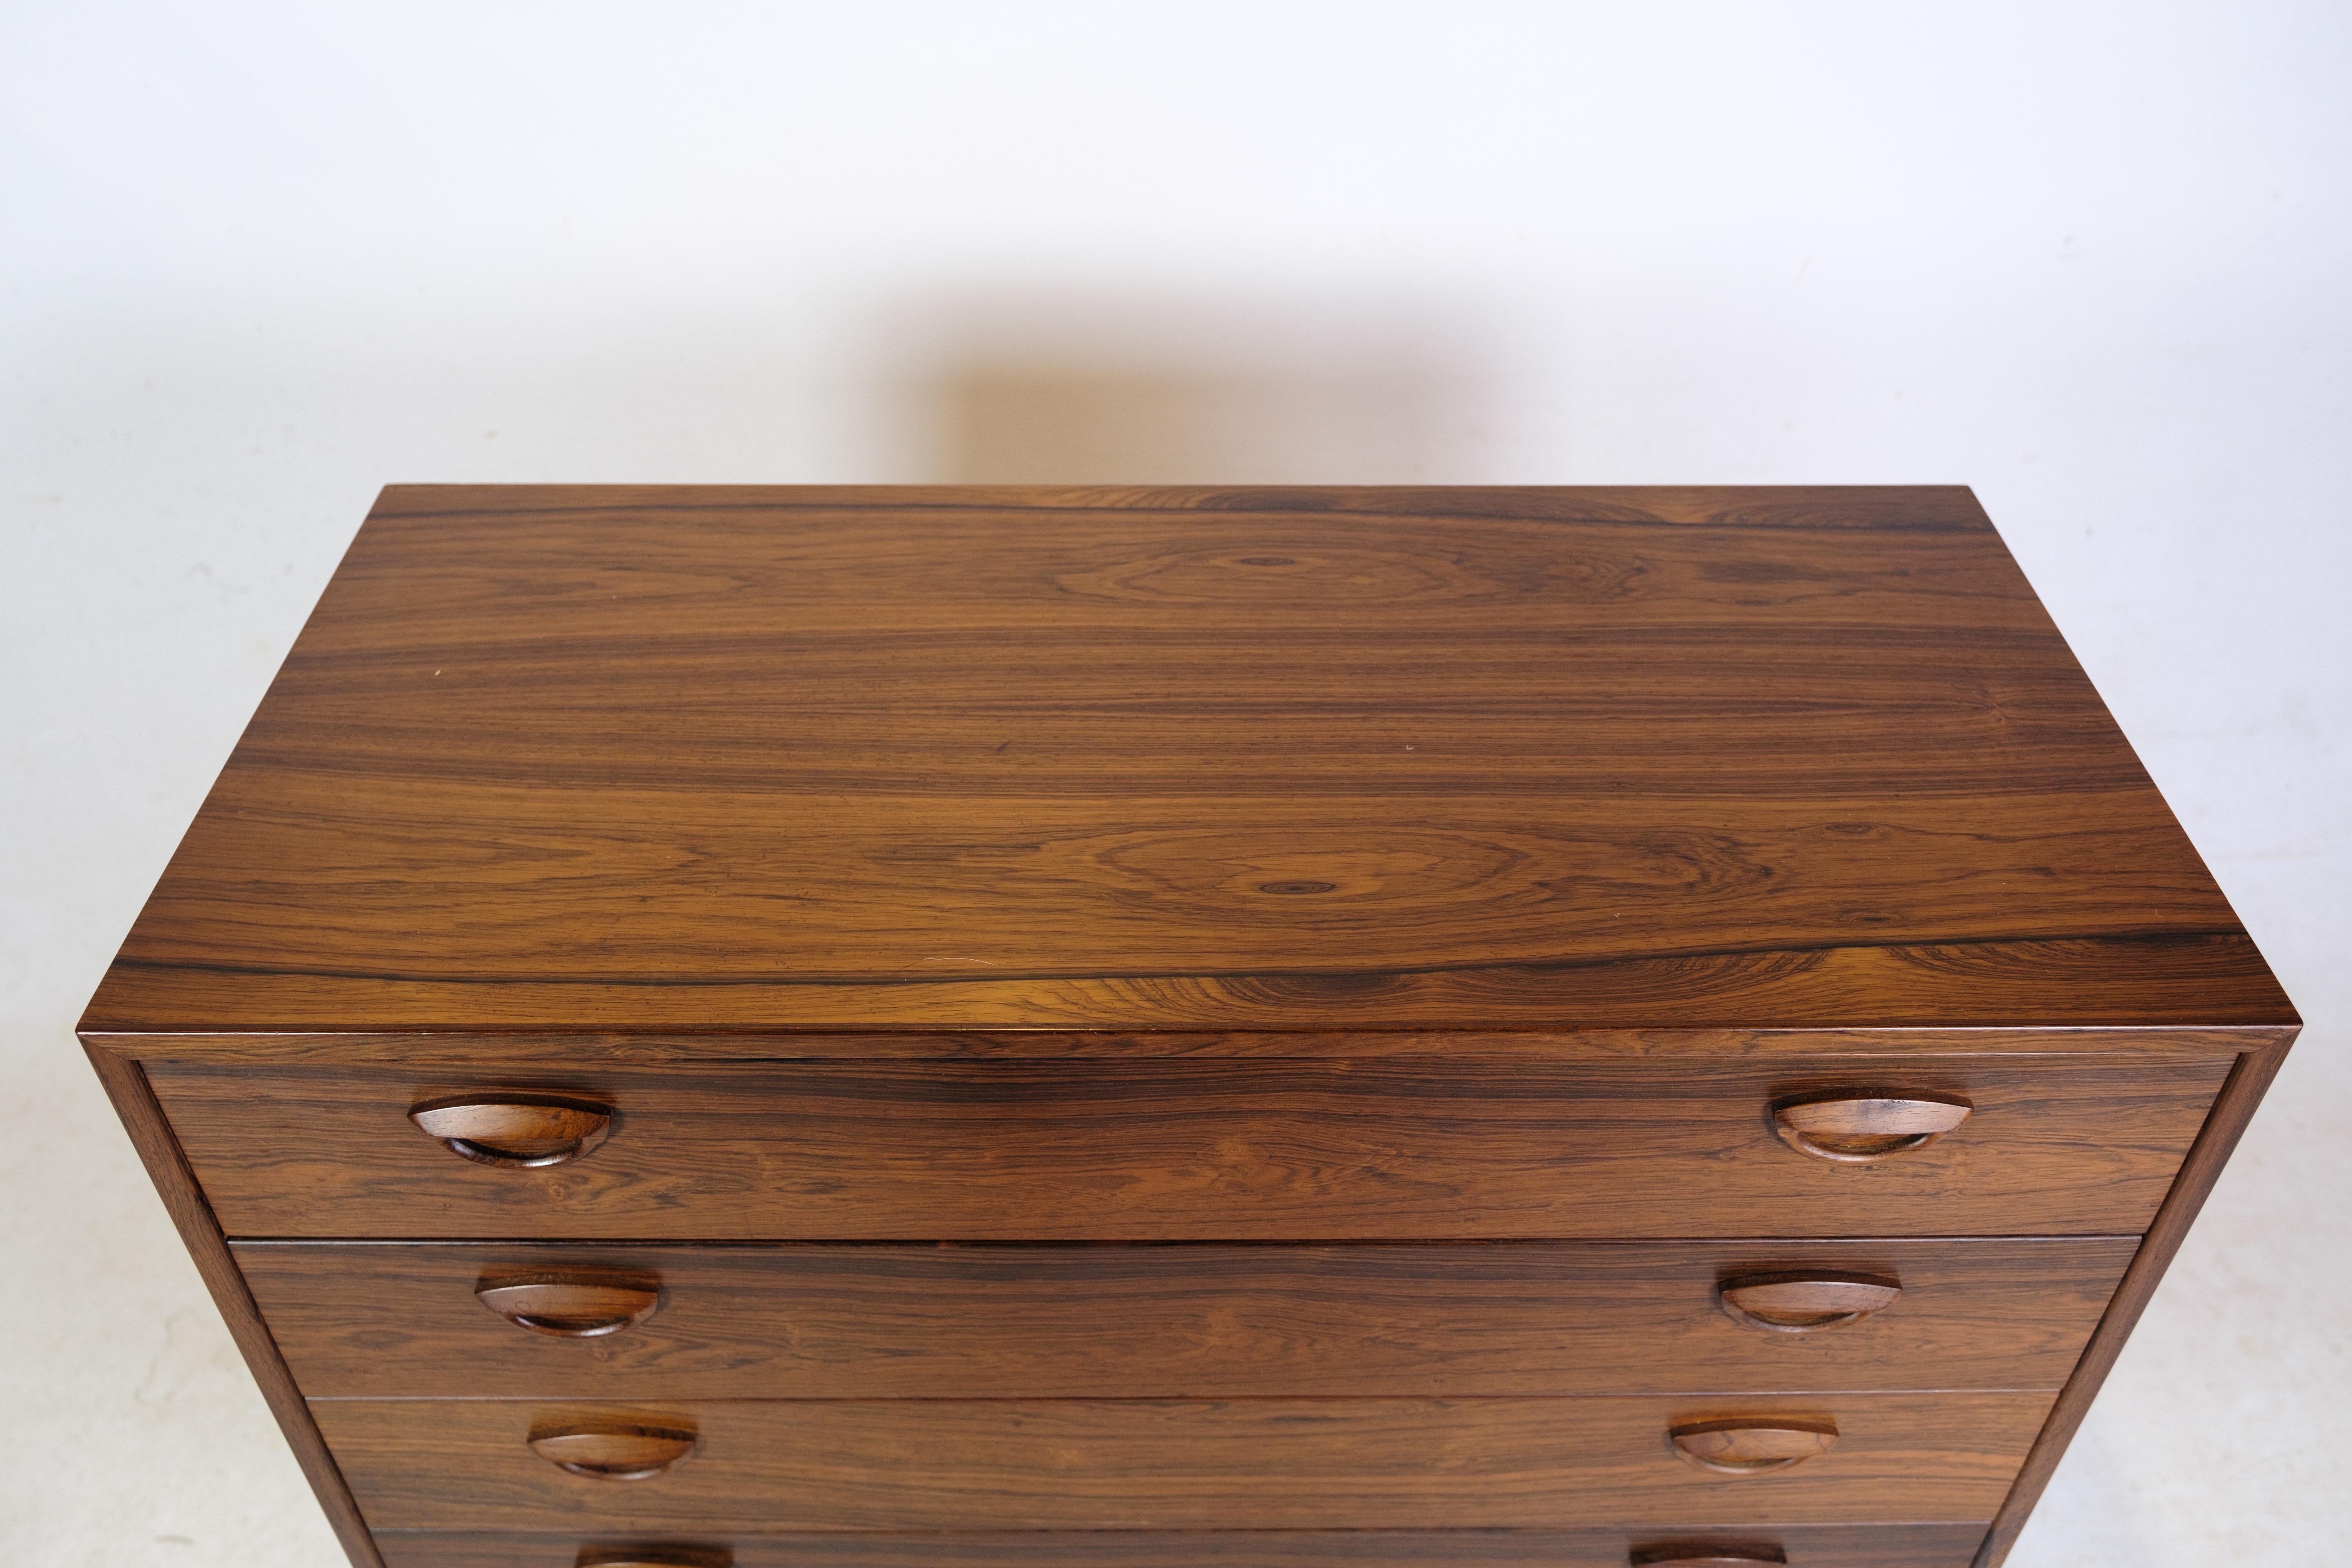 Chest of drawers in rosewood of Danish design with 4 drawers and tapered legs from around the 1960s.
Dimensions in cm: H:76 W:85.5 D:40